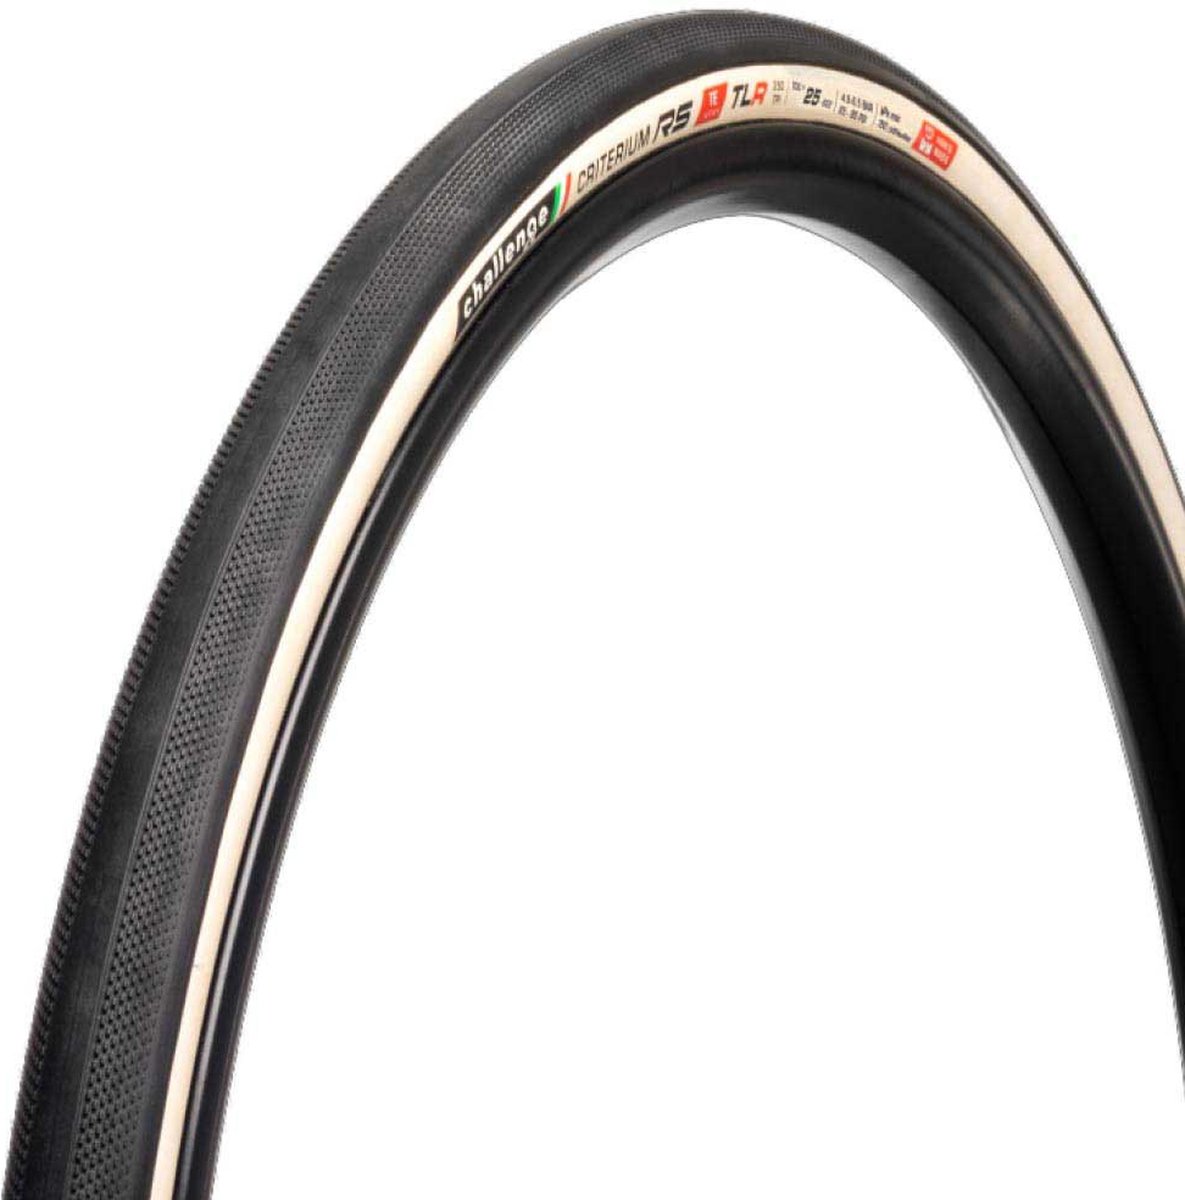 Challenge Criterium Rs Tubeless 700 X 27 Racefiets Band Zilver 700 x 27